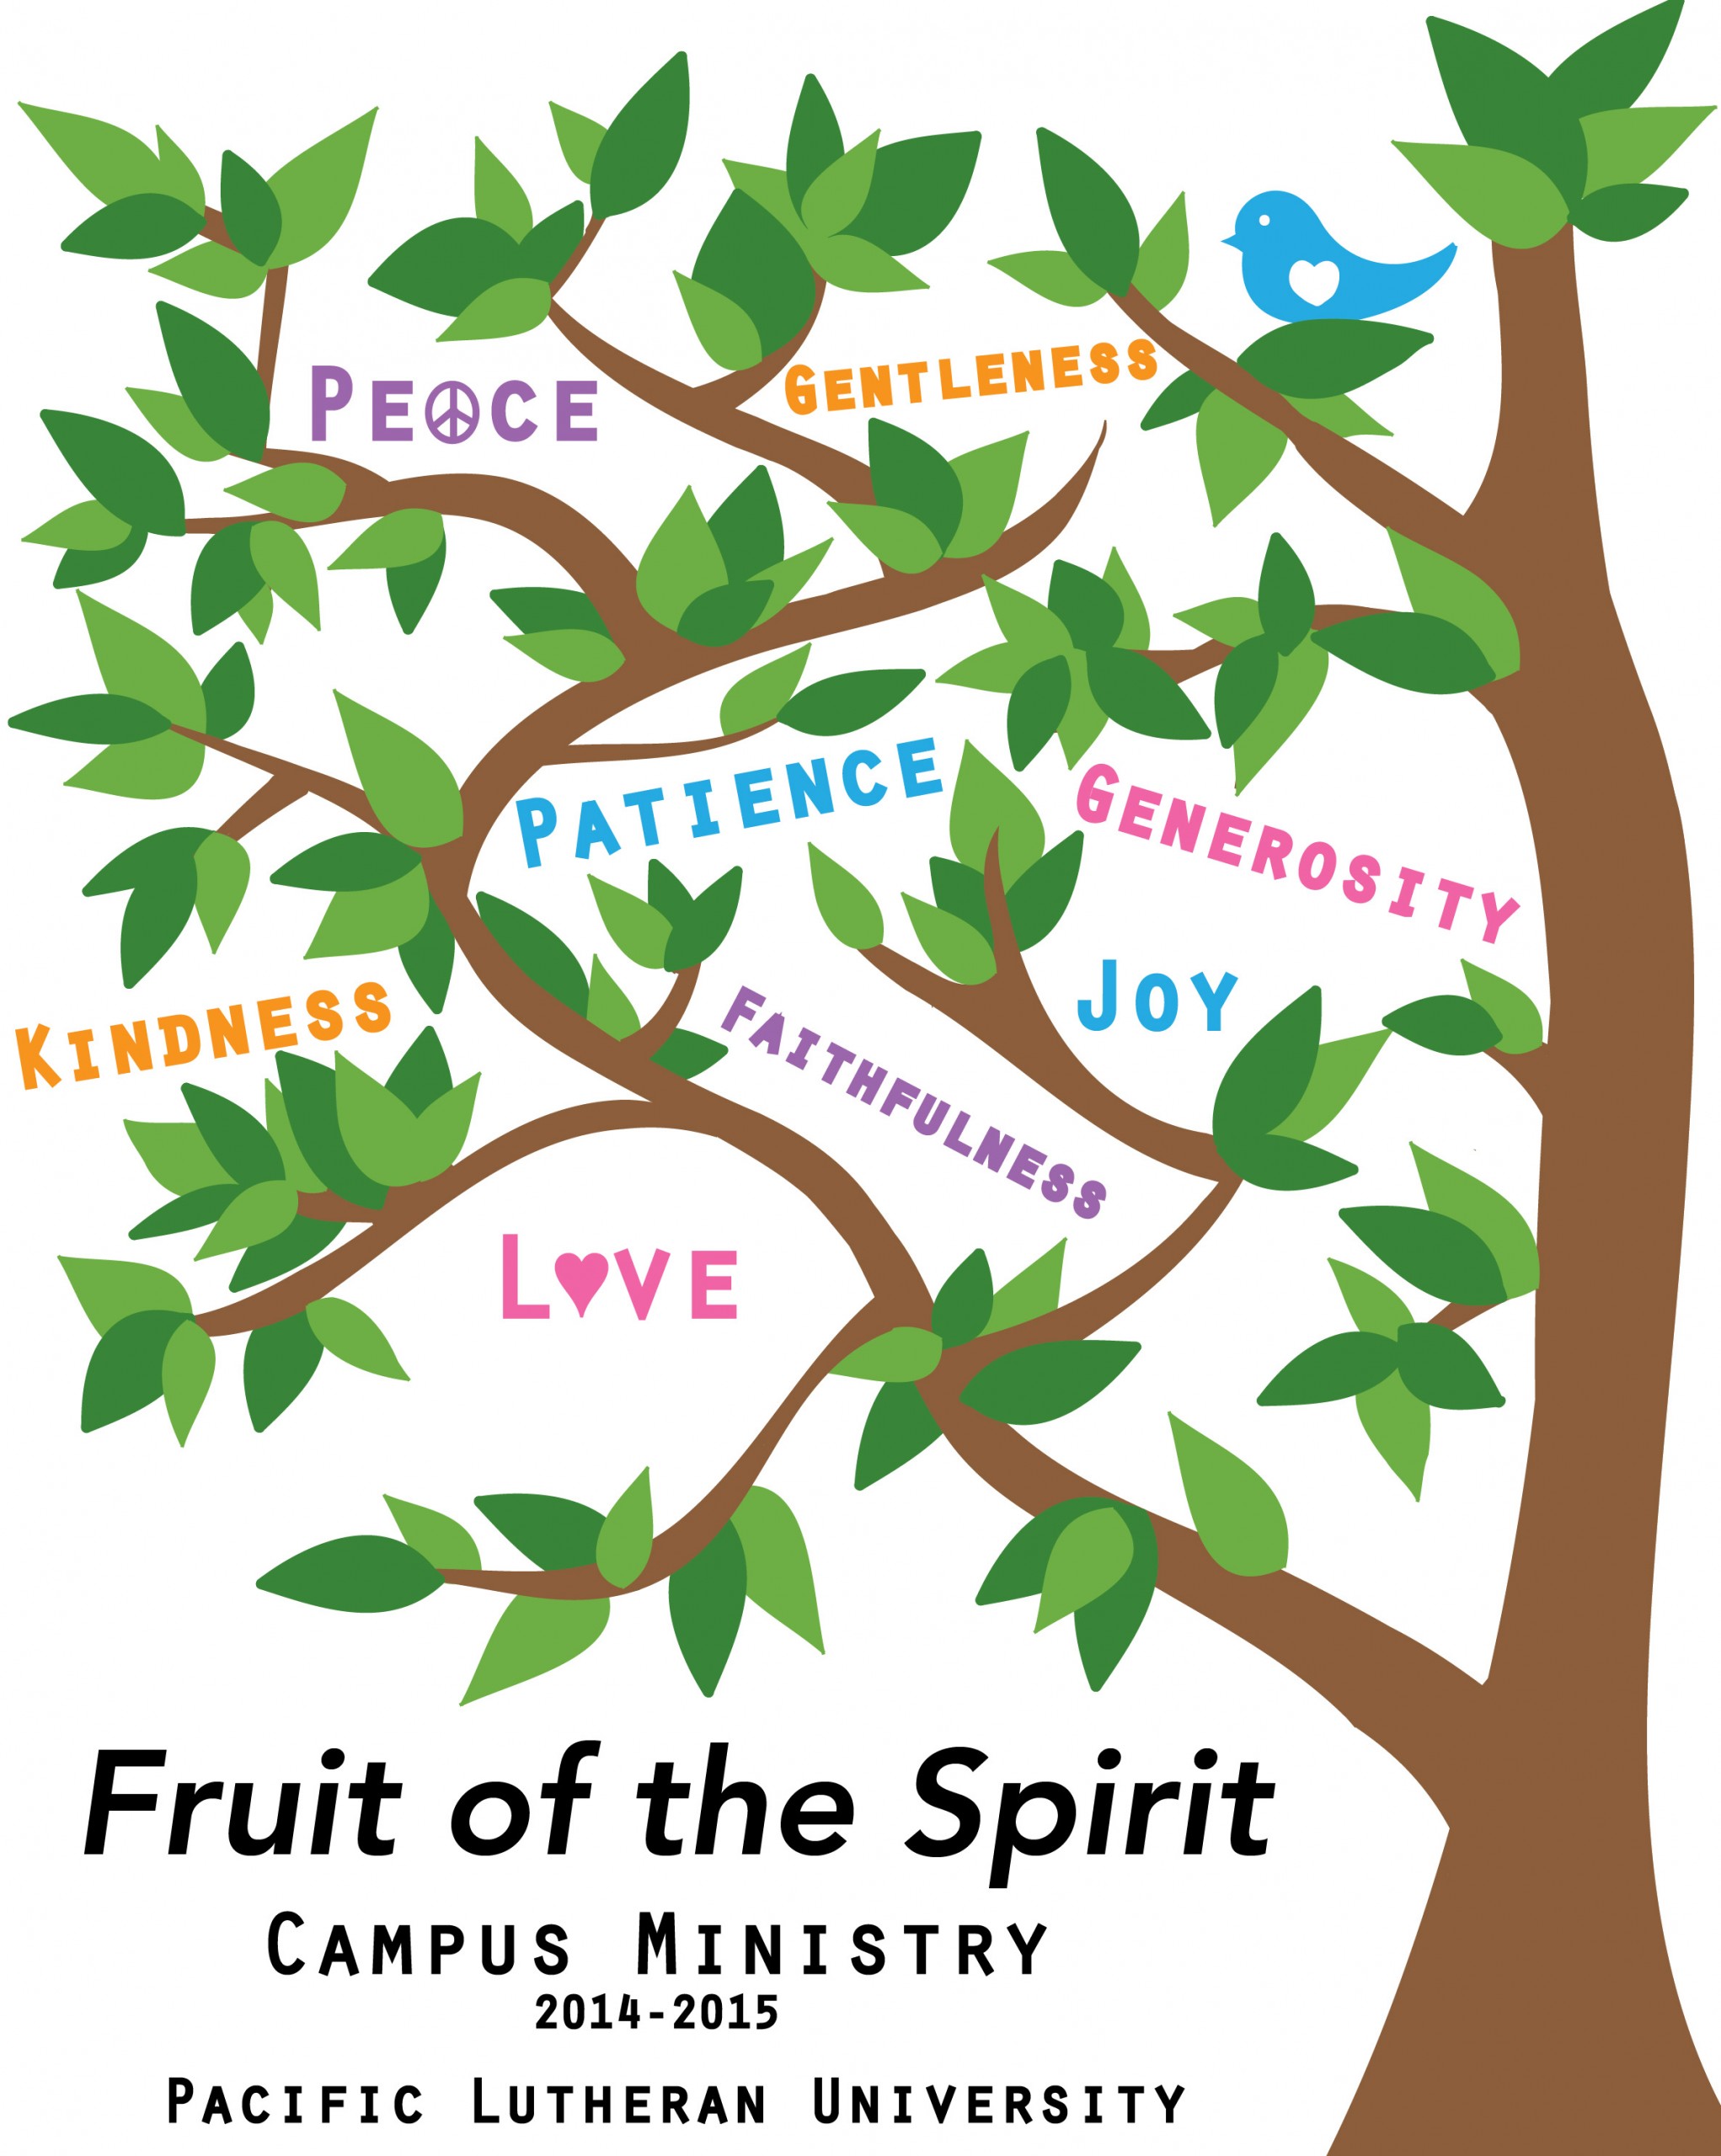 Fruit of the Spirit tree, Campus Ministry poster